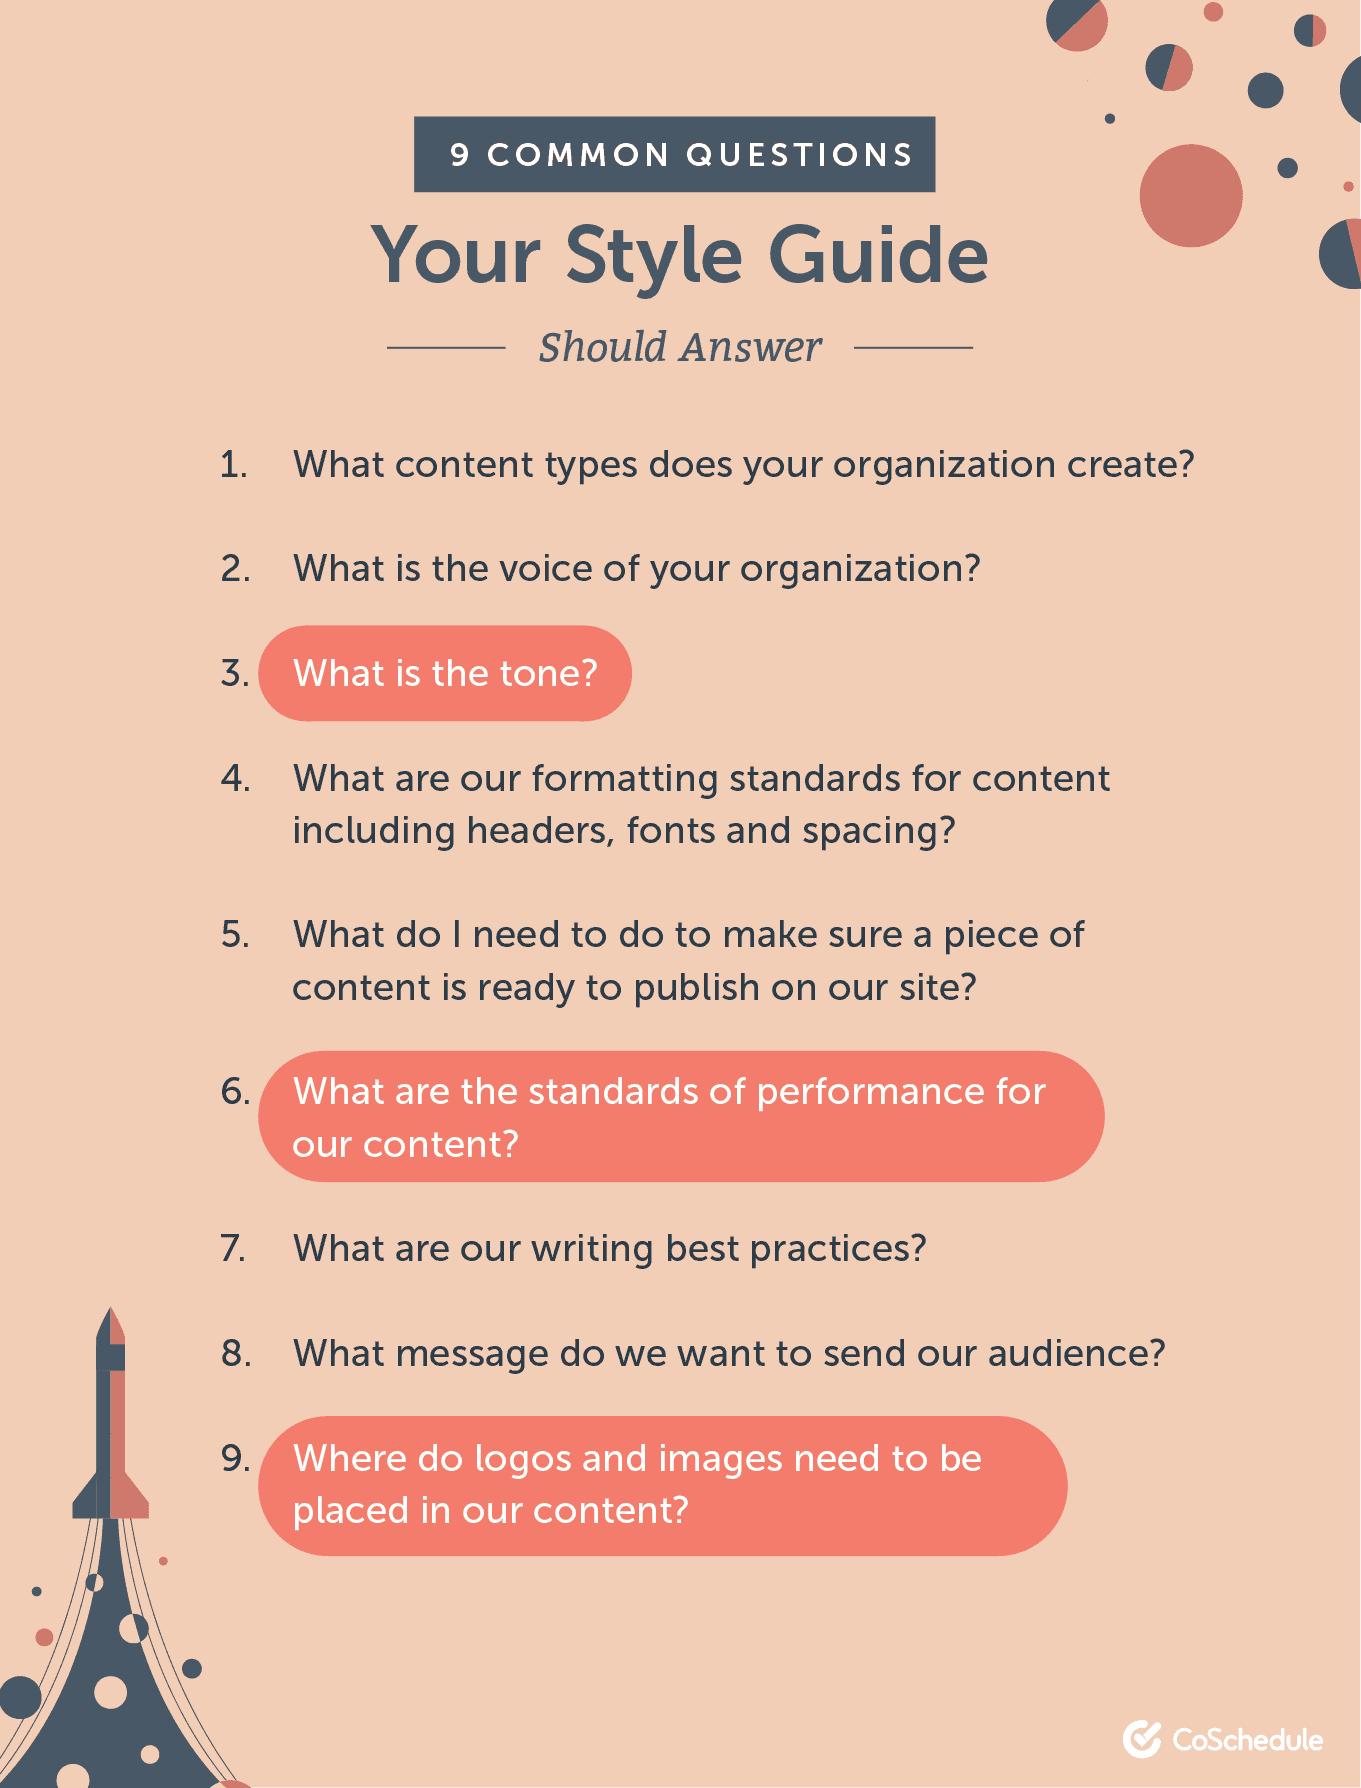 A list of nine common questions that your style guide should be able to answer